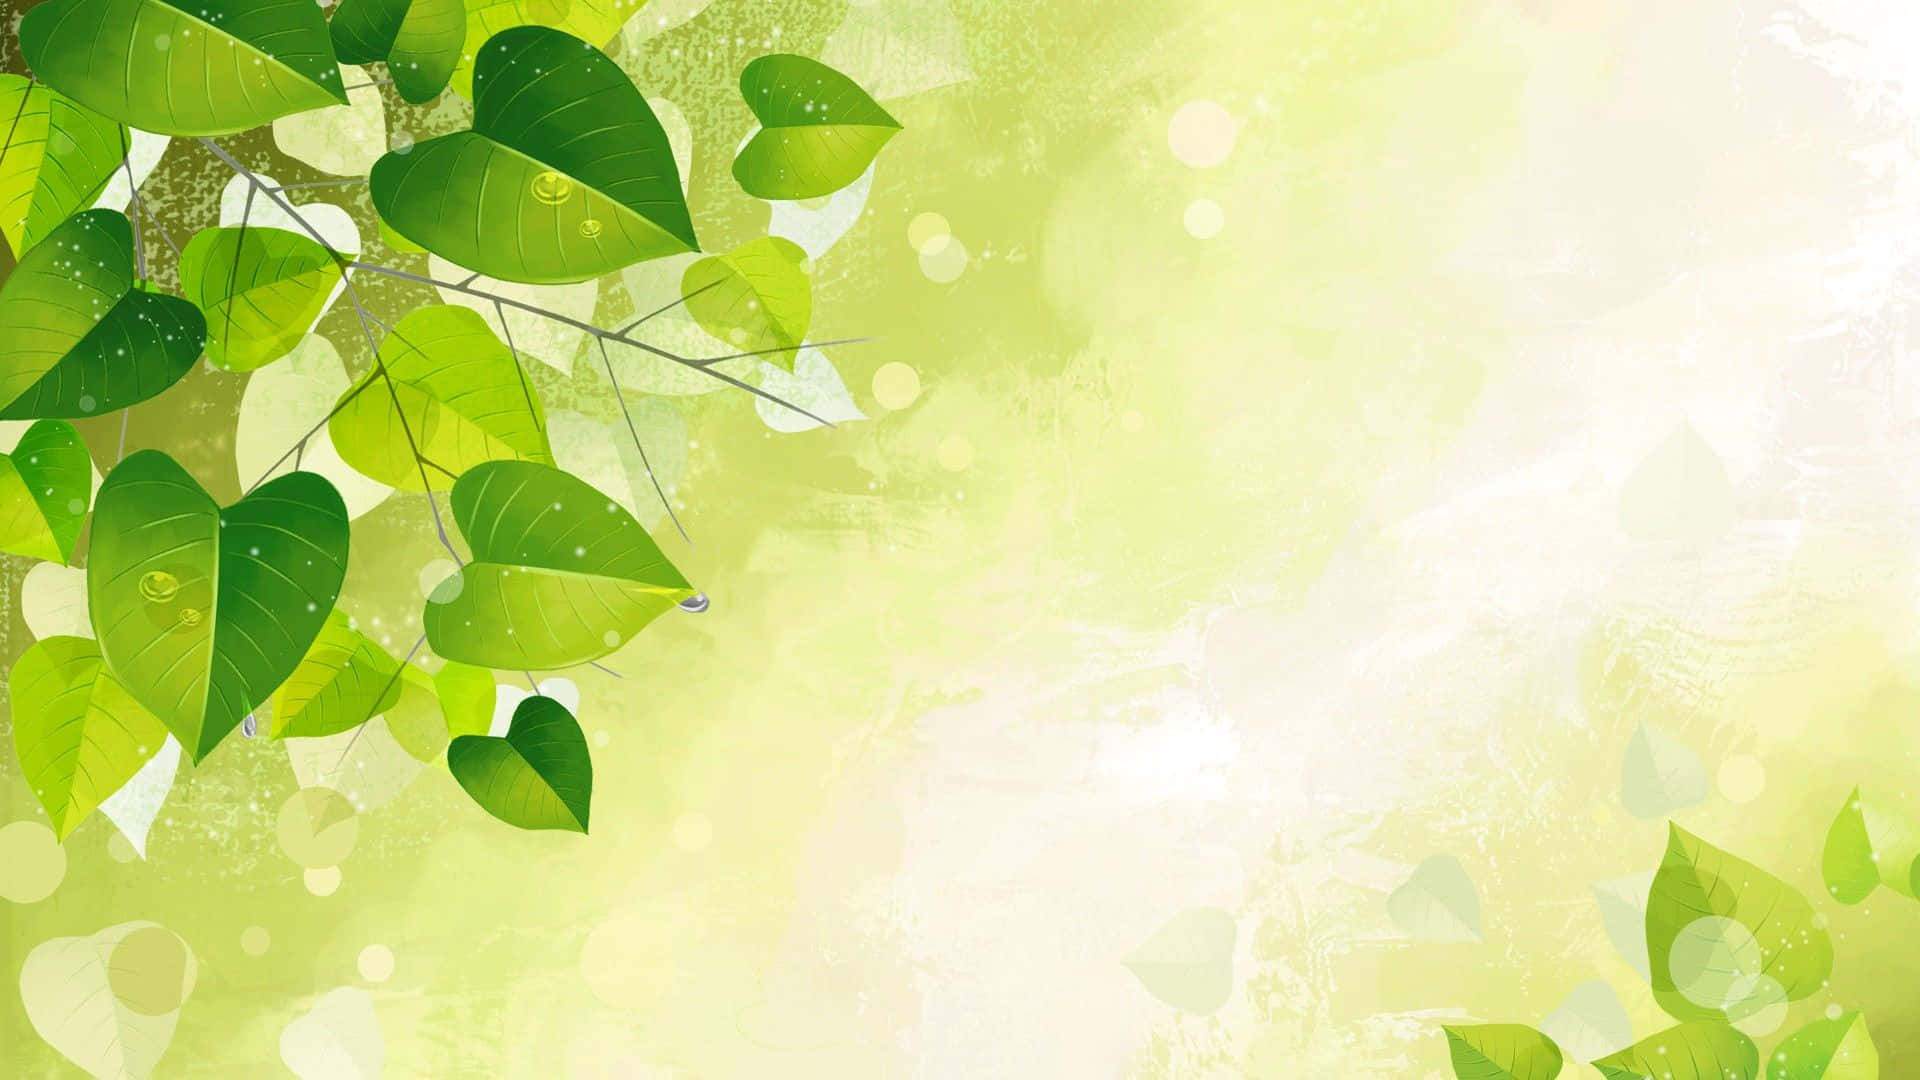 "Green beauty: Experience the ultimate calmness surrounded by cute leaves." Wallpaper